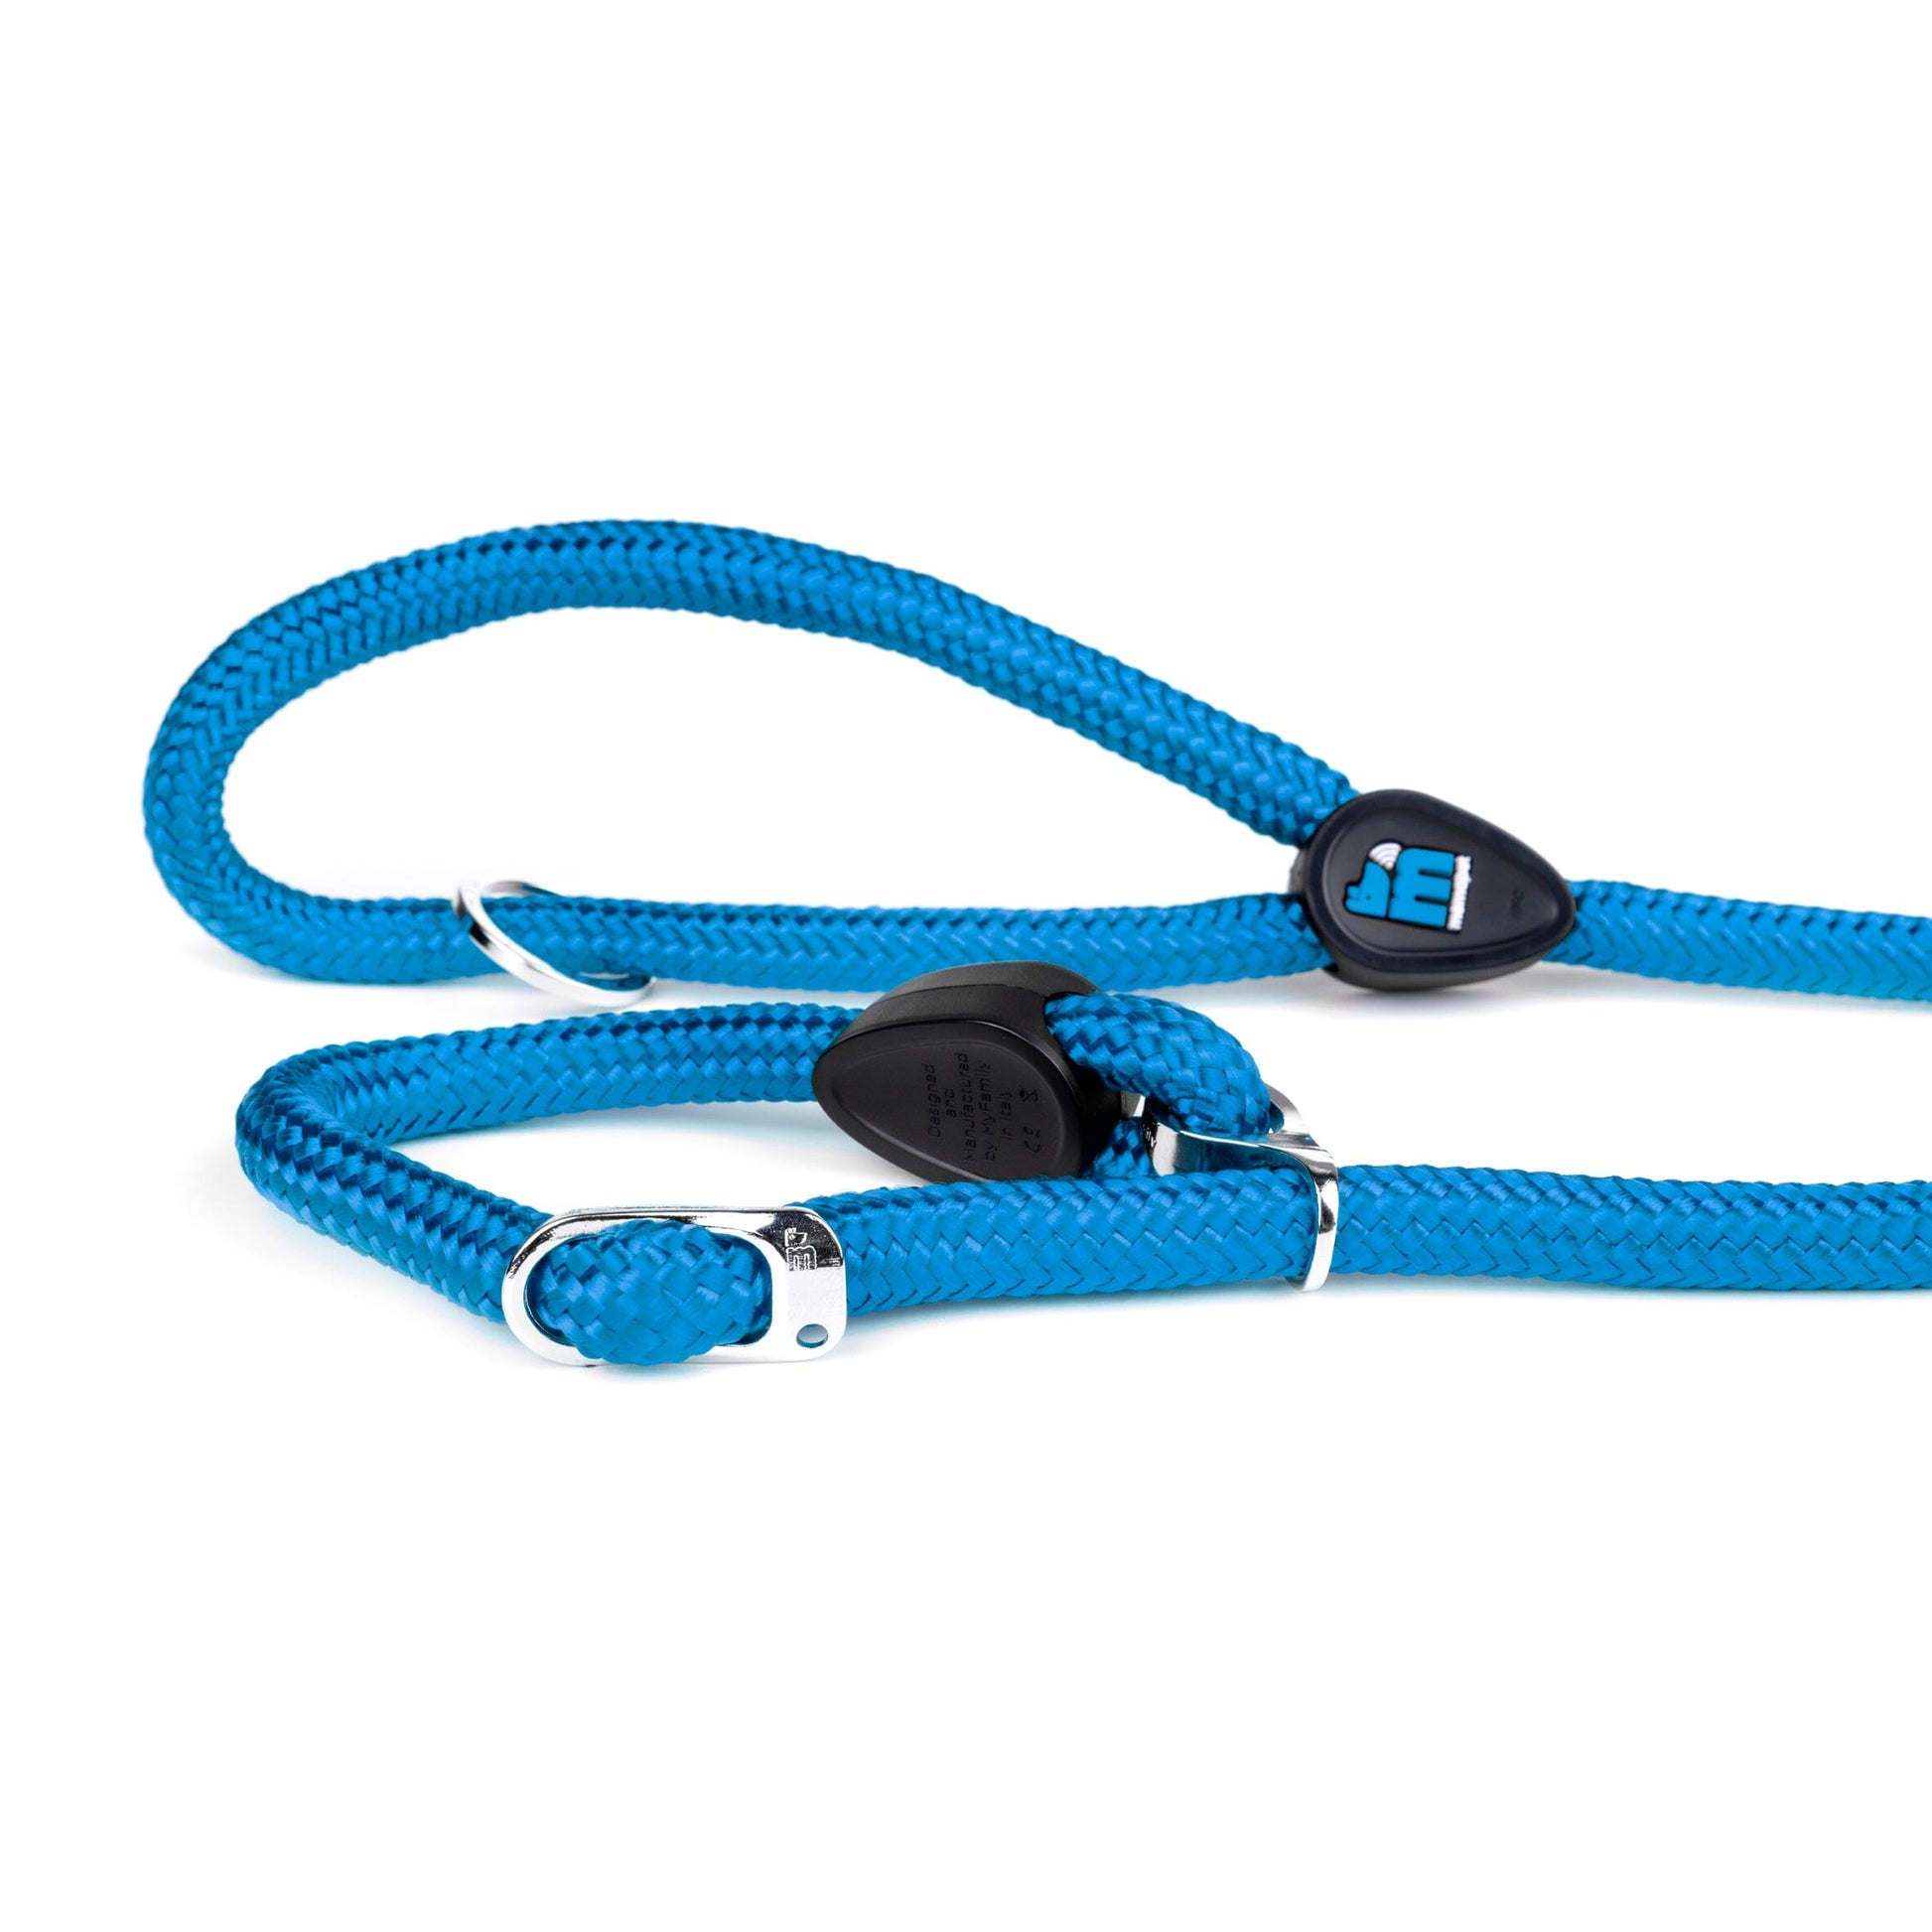 Memopet Dog Training Collar and Rope Leash 2in1 With Activity Tracking Device and Digital ID Pet Supplies My Family Medium Blue 